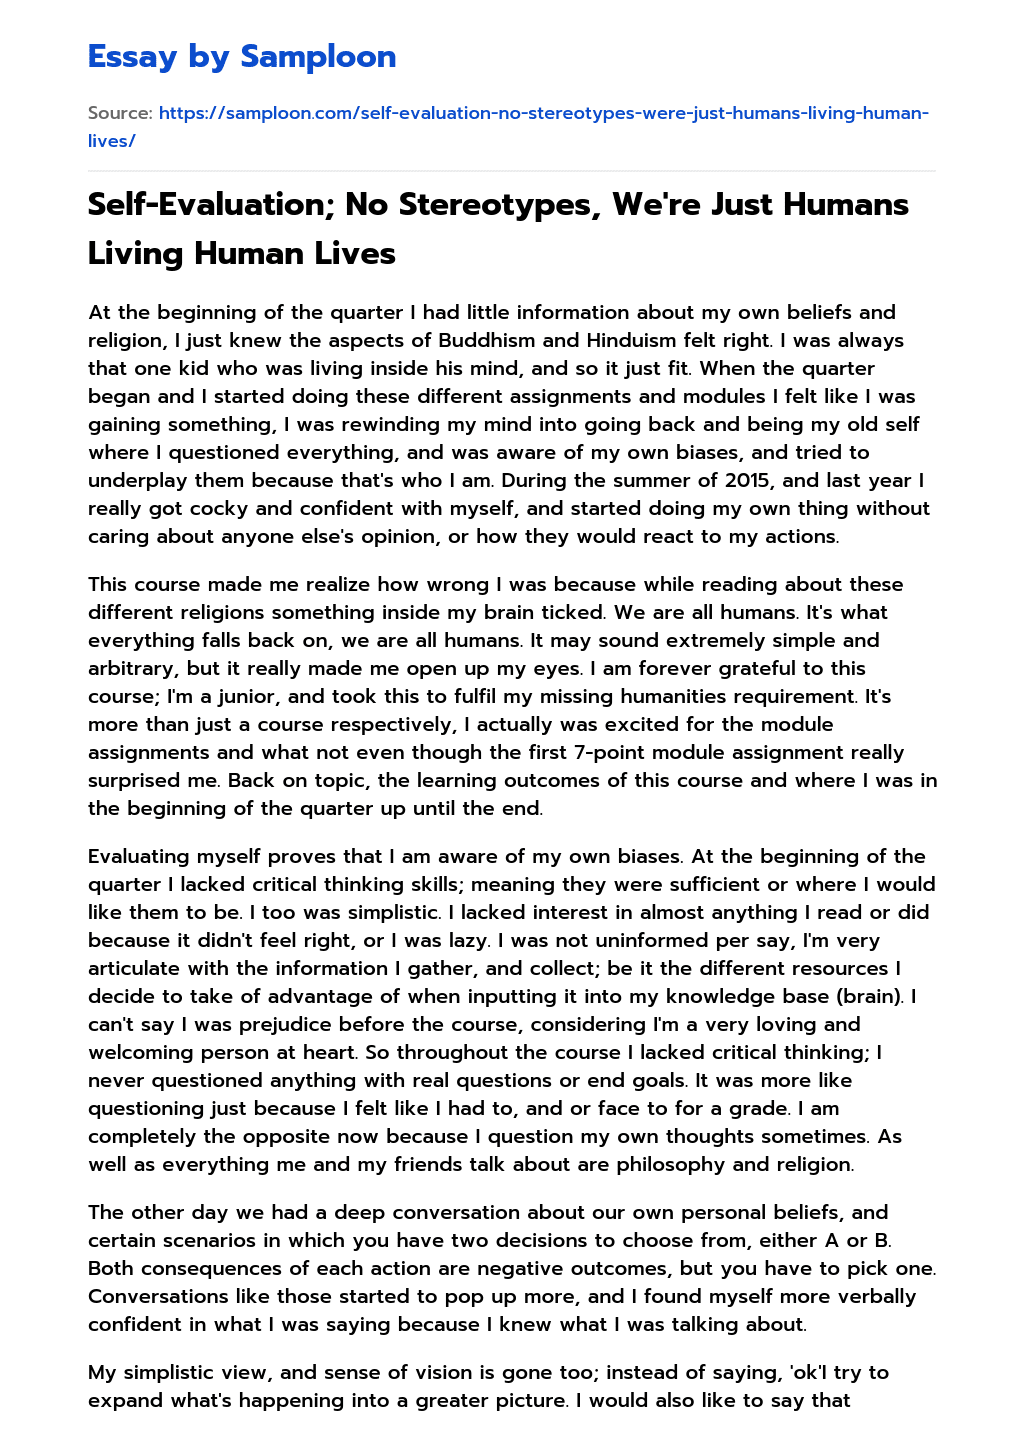 Self-Evaluation; No Stereotypes, We’re Just Humans Living Human Lives essay